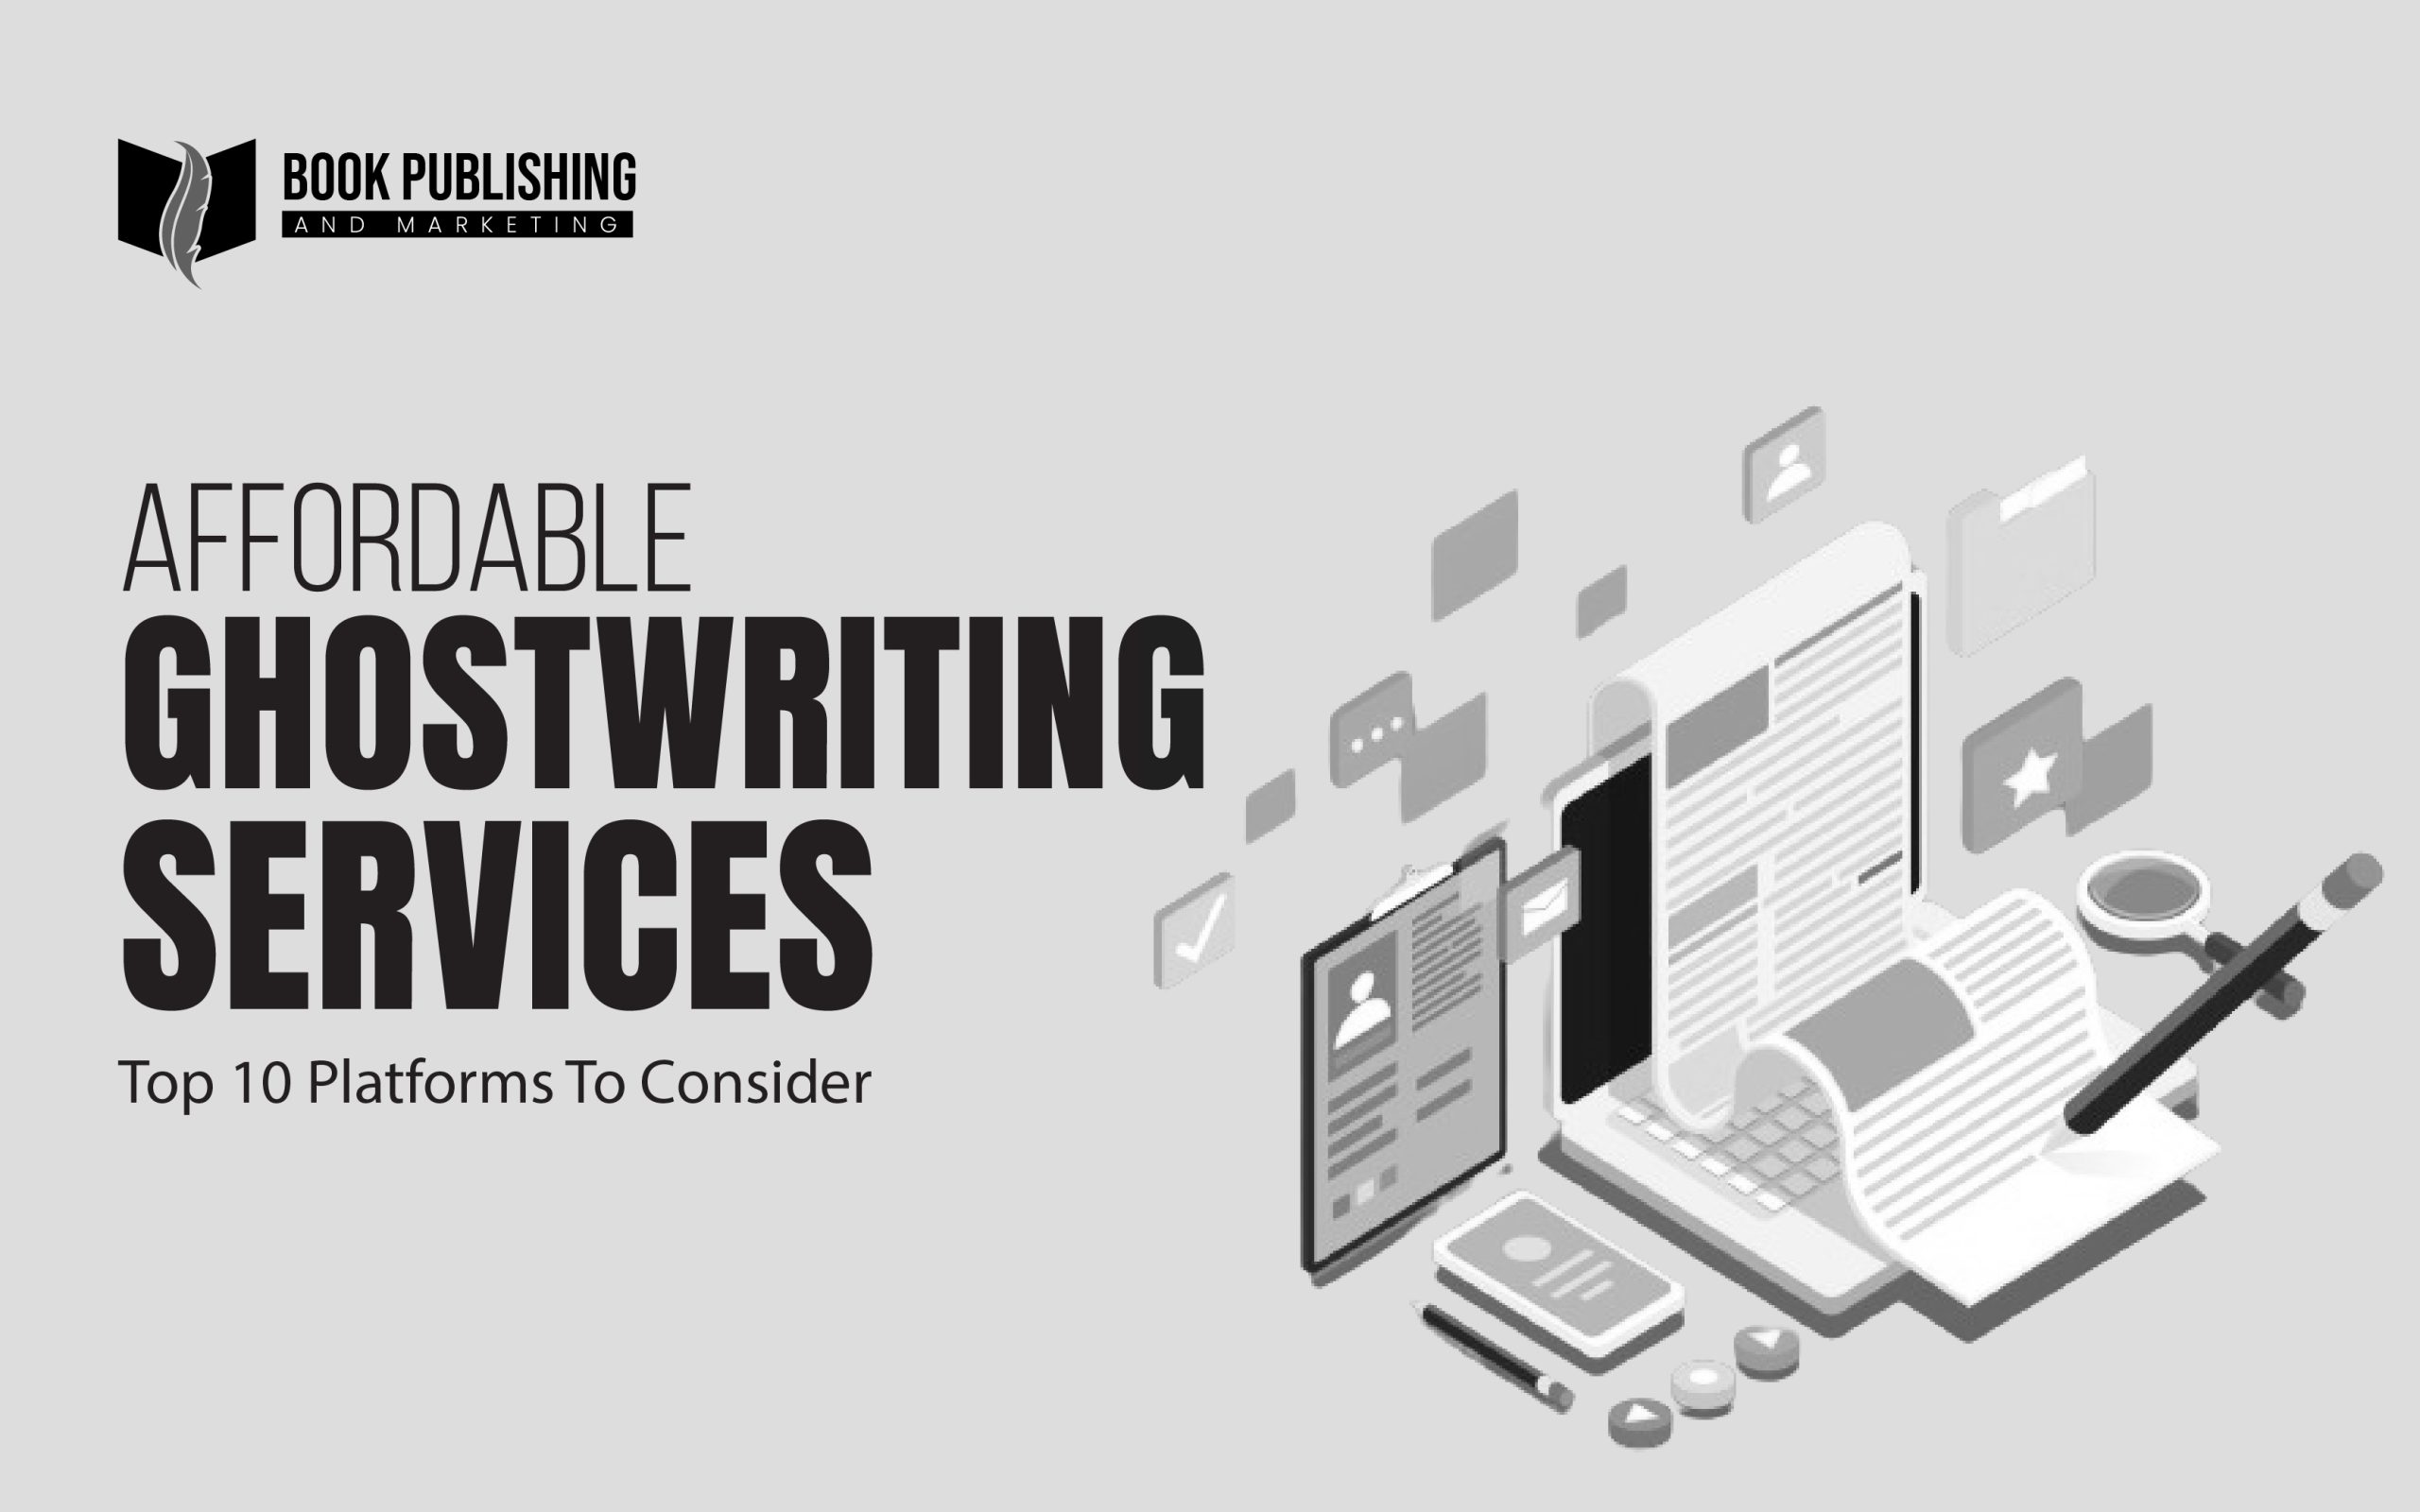 Top 10 Platforms To Consider For Affordable Ghostwriting Services